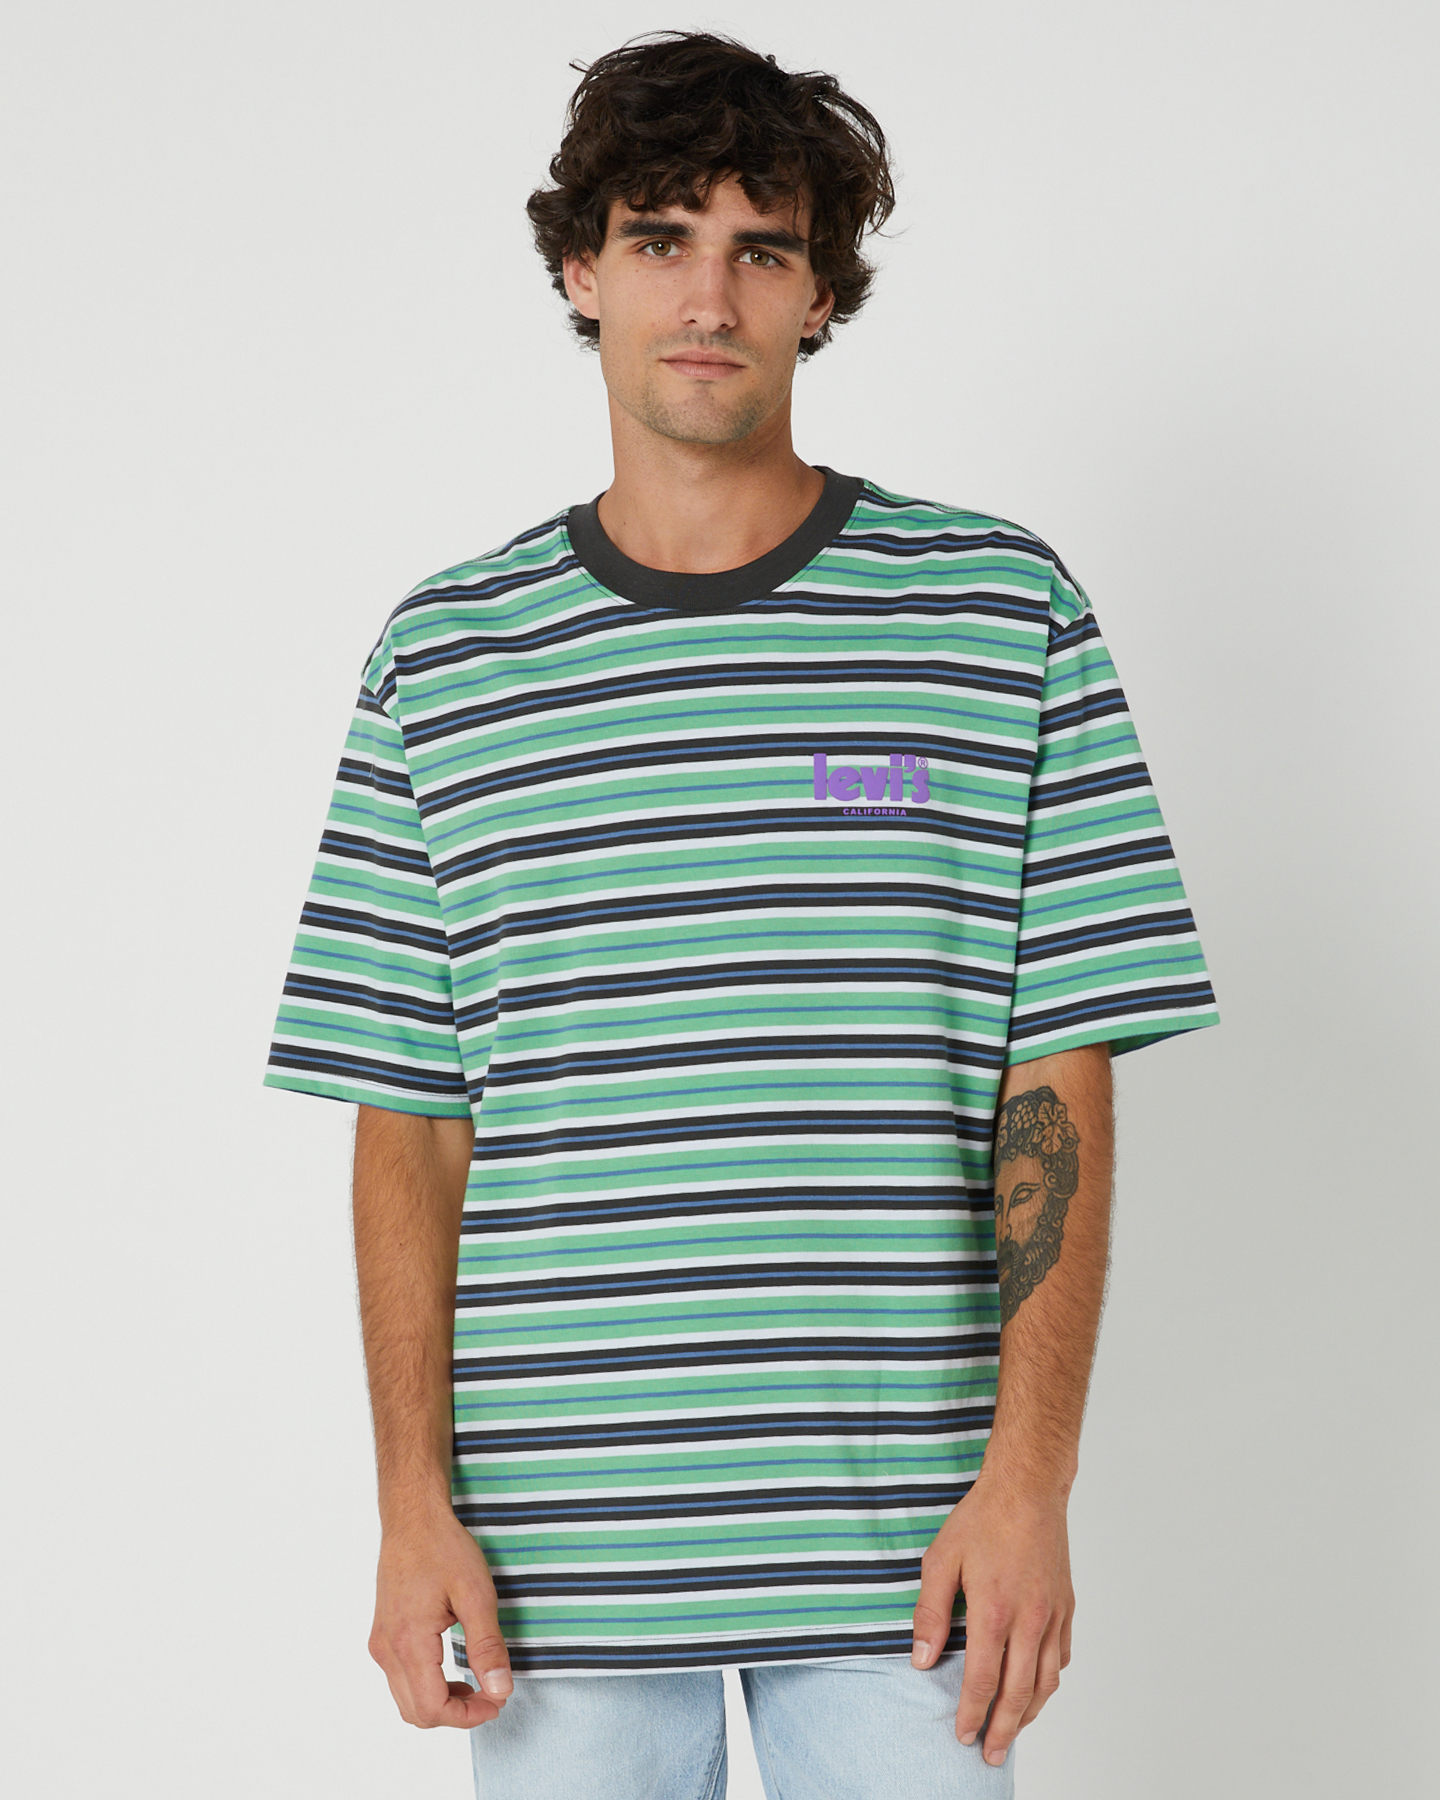 Levi's Stay Loose Mens Ss Tee - Peppermint | SurfStitch